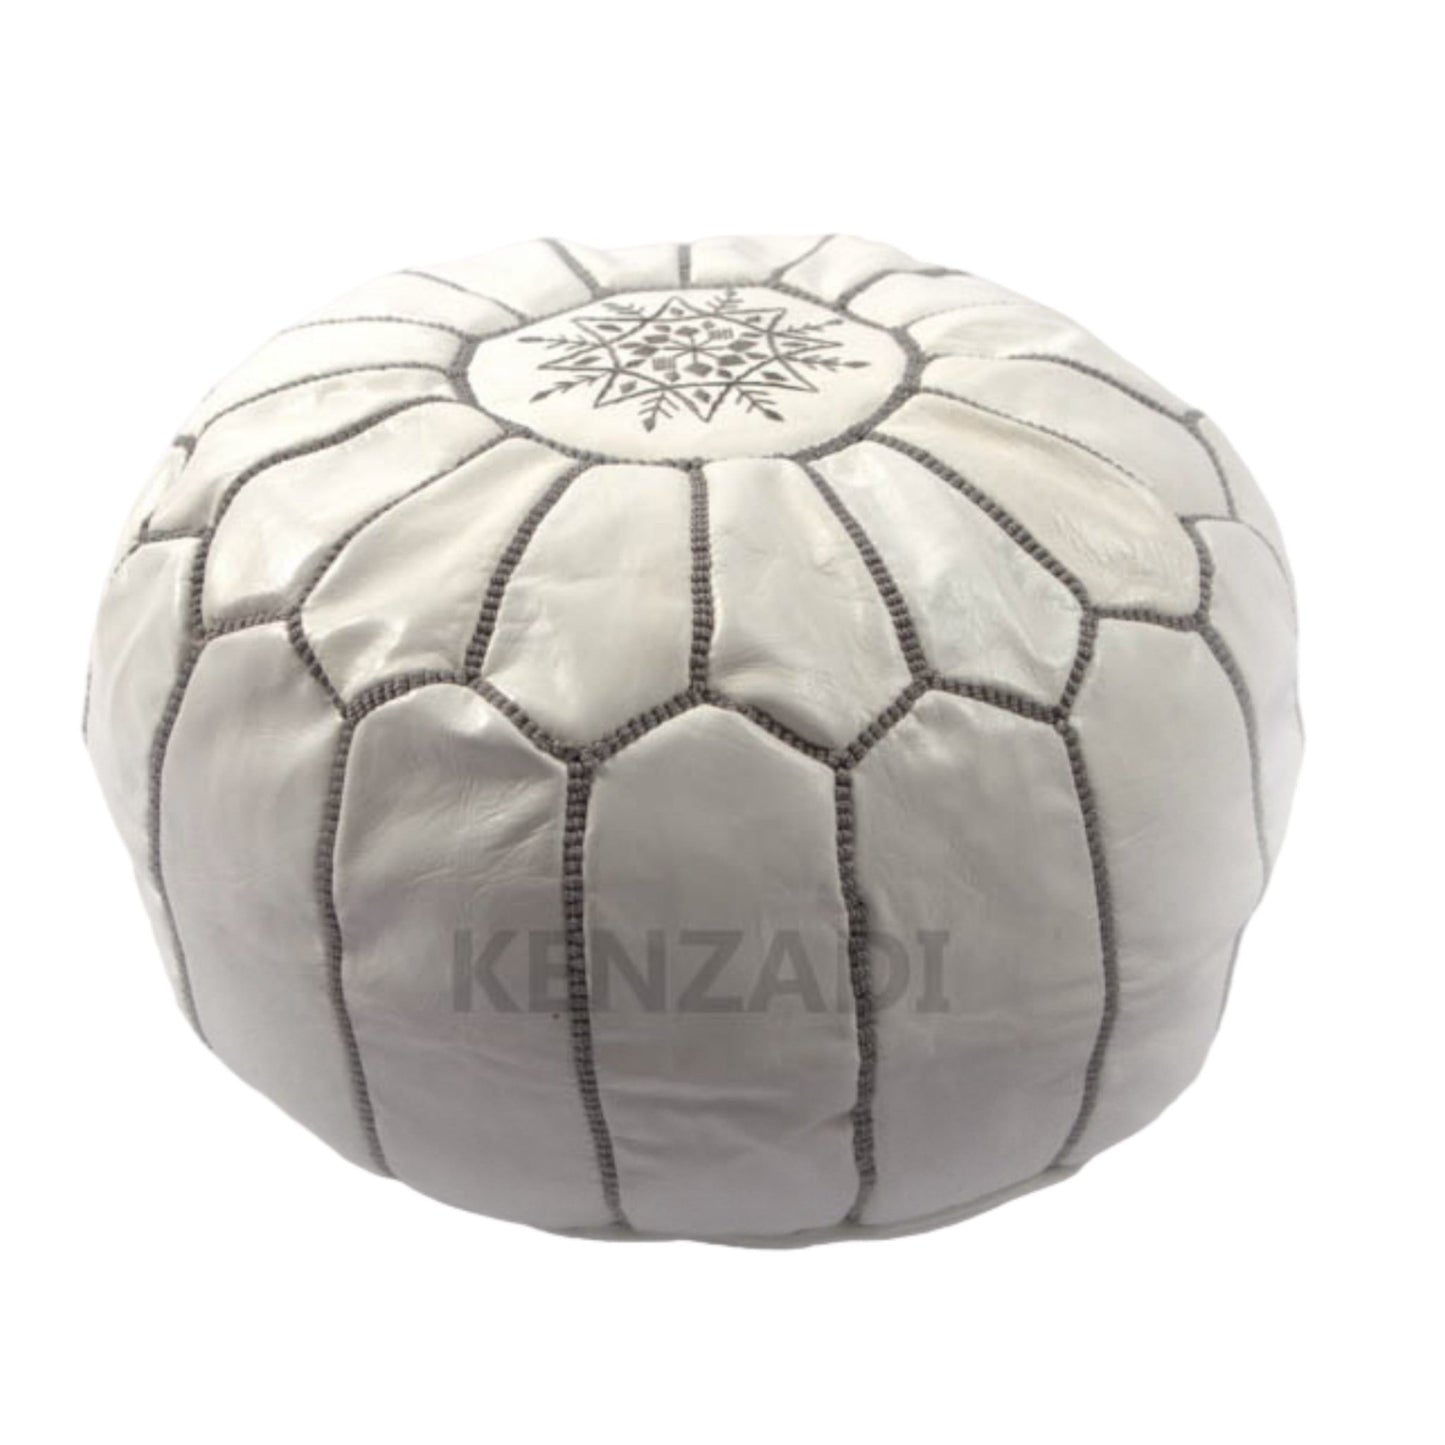 Moroccan leather Pouf, round Pouf, berber Pouf, White Pouf with Grey embroidery by Kenzadi - Handmade by My Poufs